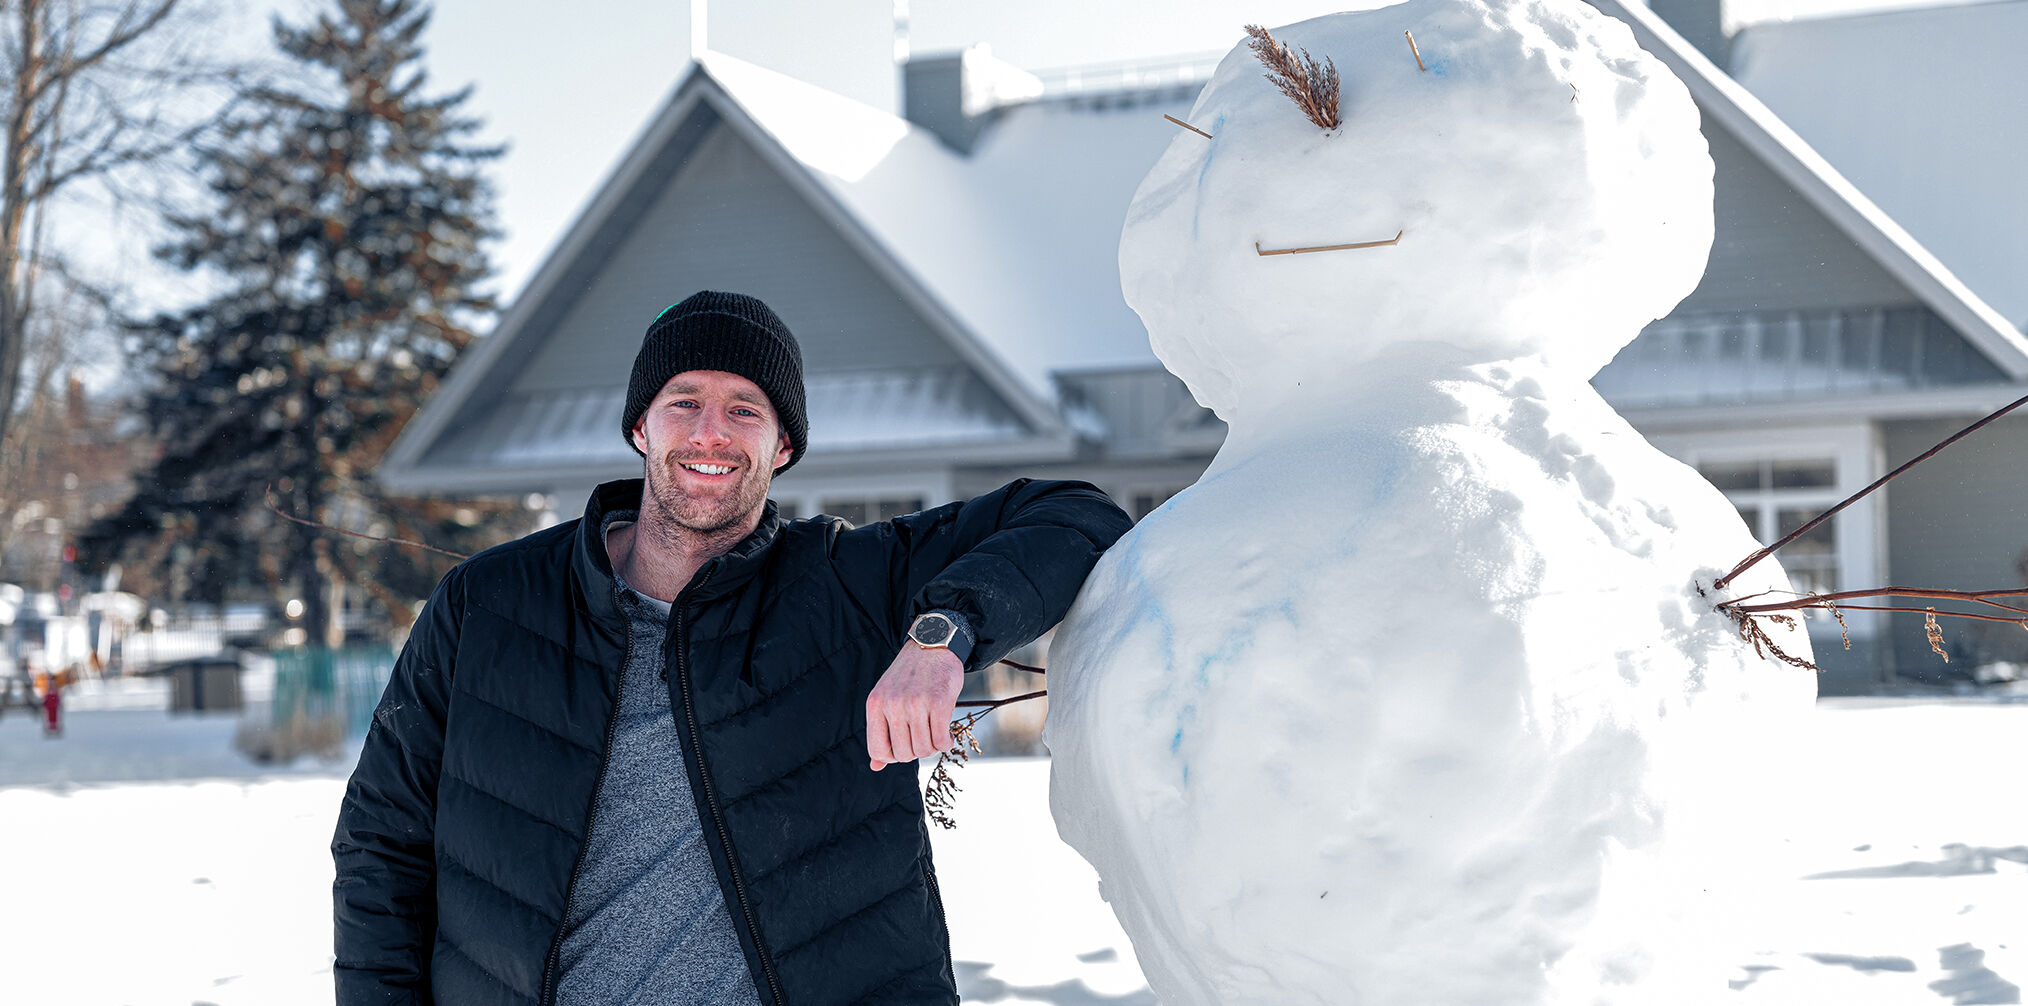 Max Parrot standing next to a snowman